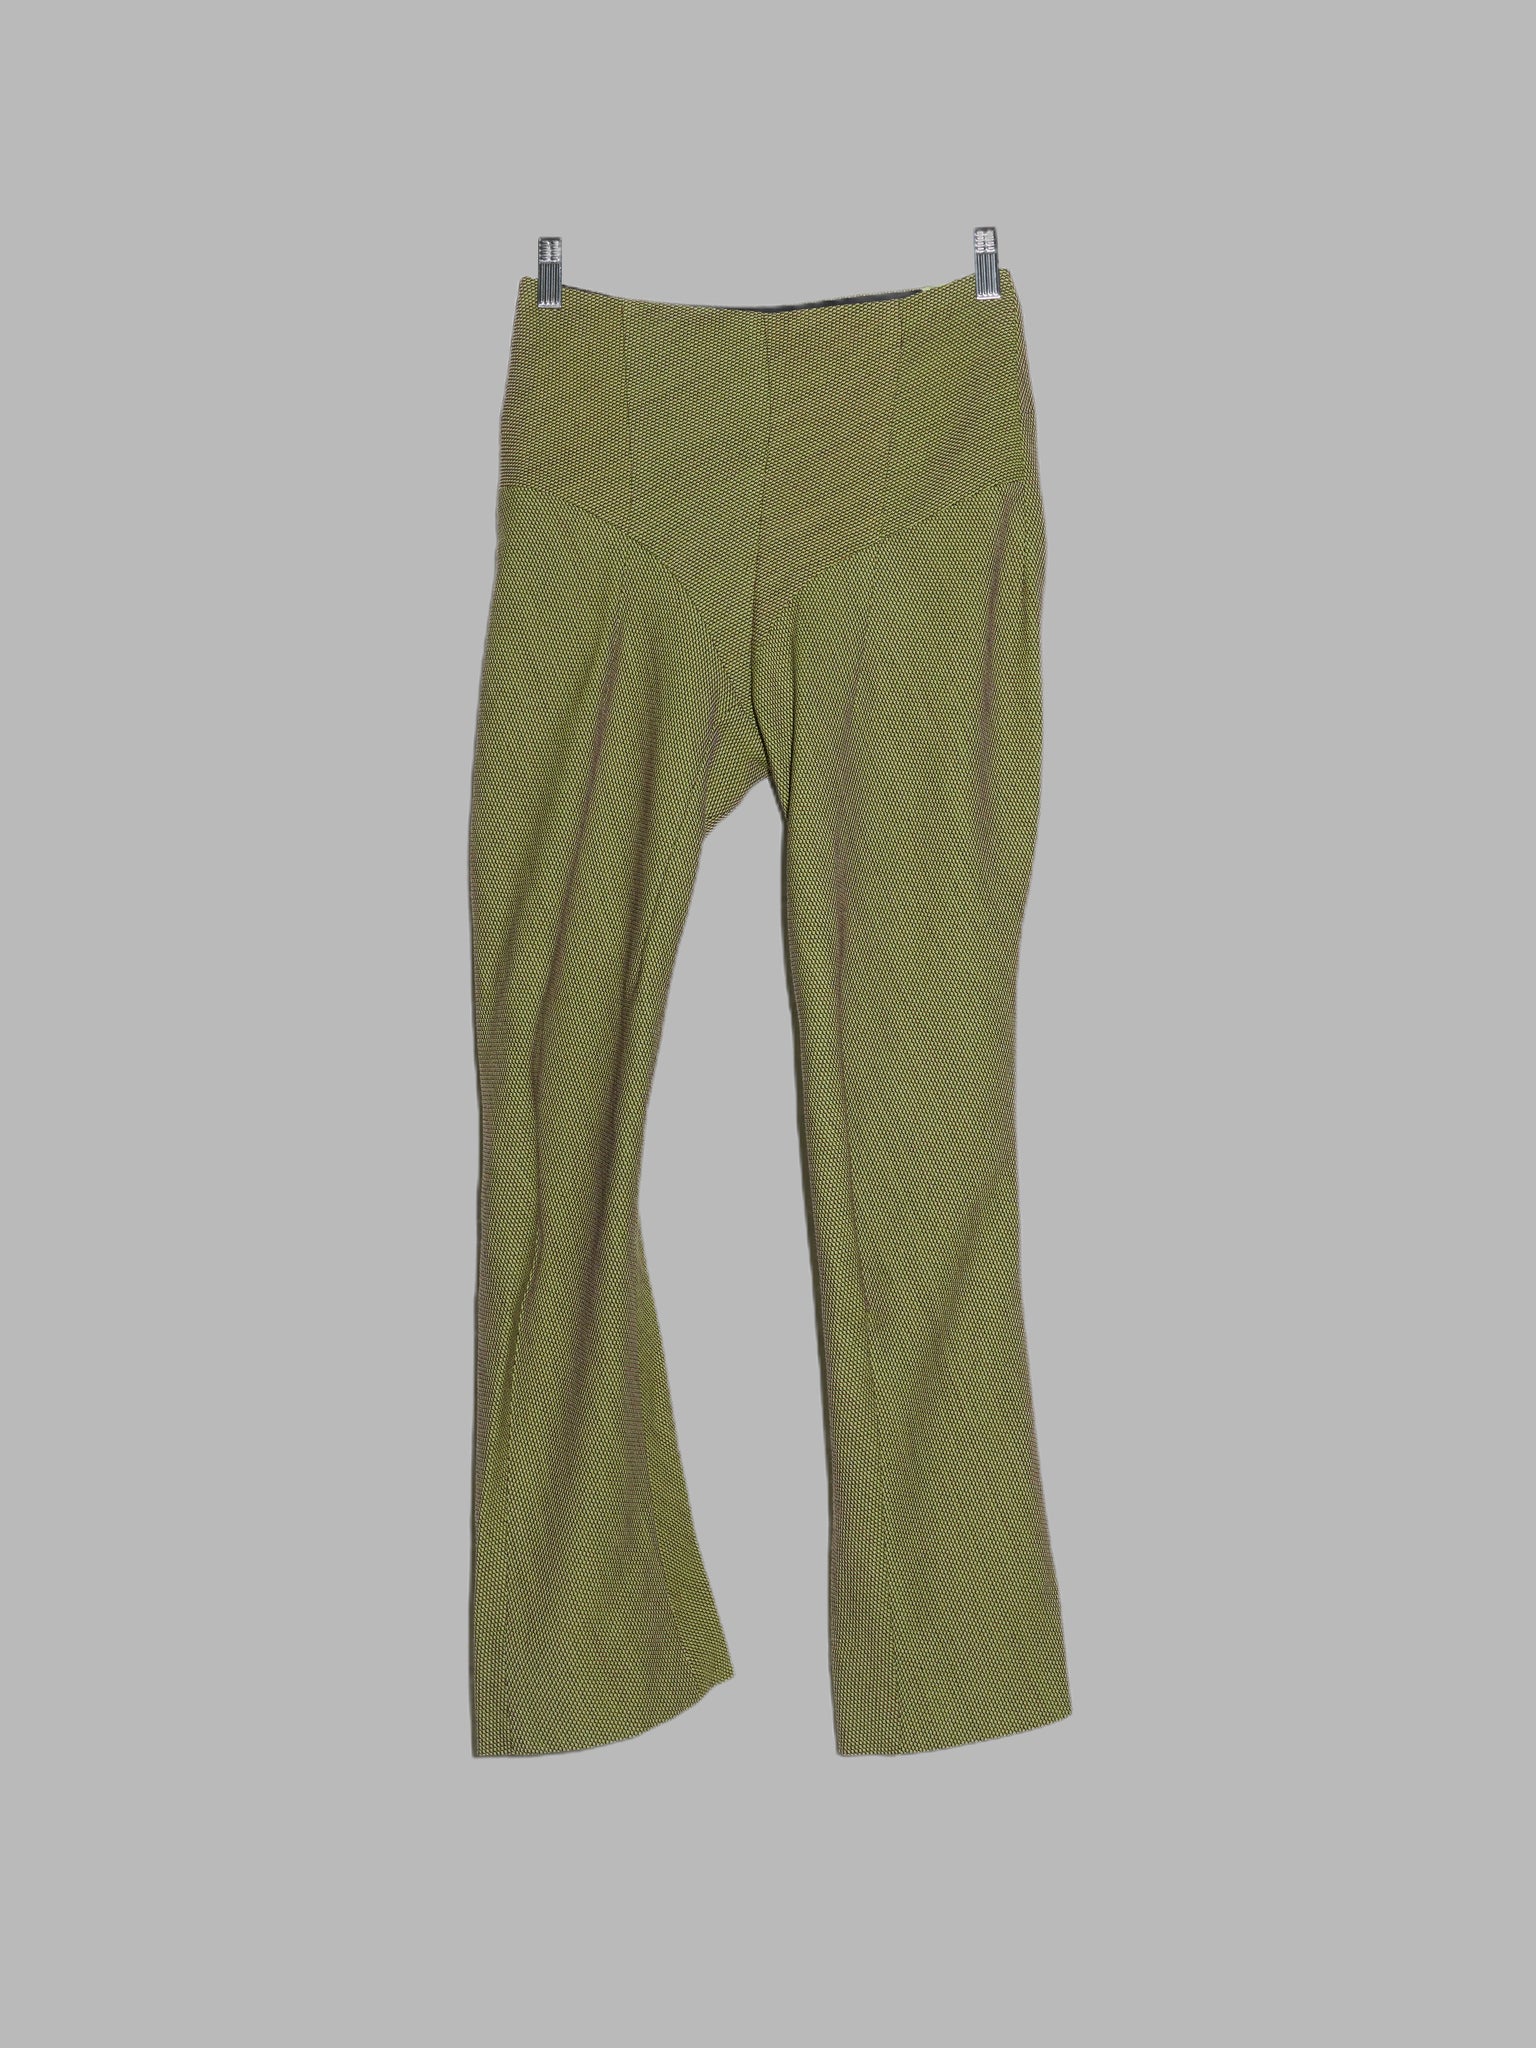 Junya Watanabe Comme des Garcons AW1997 textured green wool 3D panelled trousers